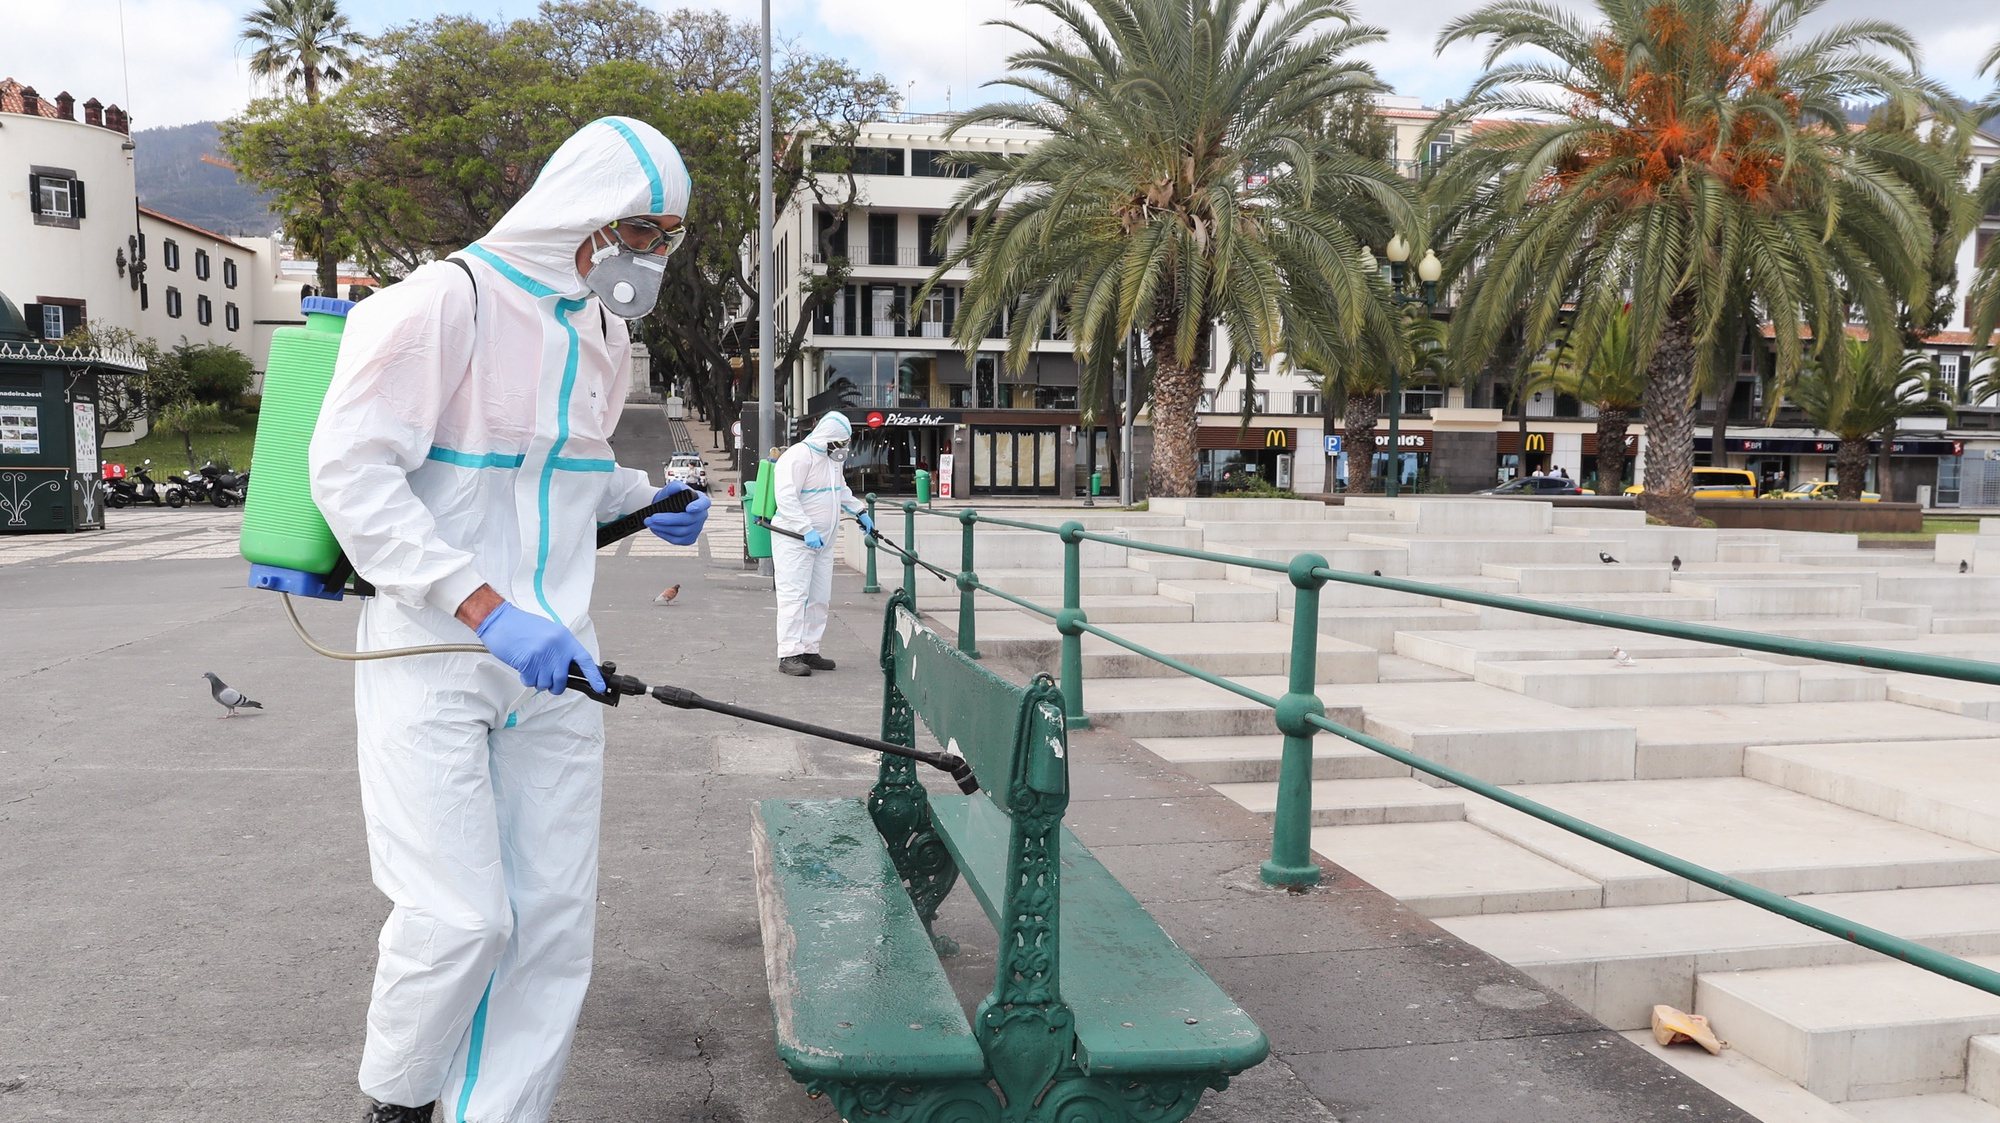 epa08312091 Municipal employees disinfect a street in the centre of Funchal due to the epidemic of covid-19, Madeira Island, Portugal, 21 March 2020. In Portugal, there are 12 deaths and 1,280 confirmed infections. Portugal is in a state of emergency from 00:00 on March 19th until 23:59 on 02 April. Countries around the world are taking increased measures to stem the widespread of the SARS-CoV-2 coronavirus which causes the Covid-19 disease.  EPA/HOMEM DE GOUVEIA